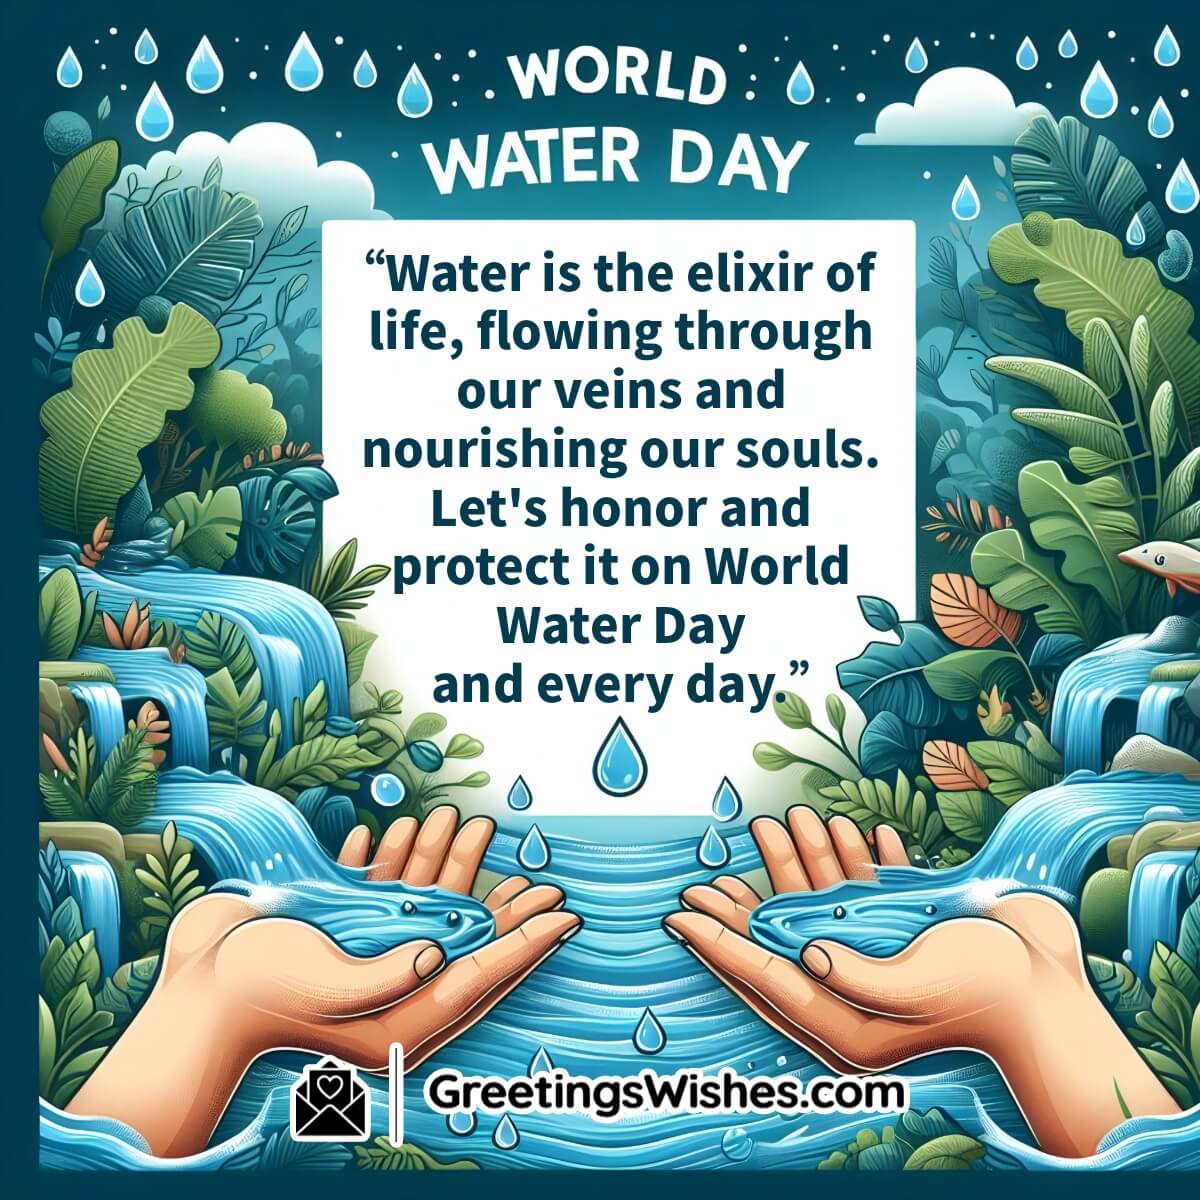 World Water Day Message Image